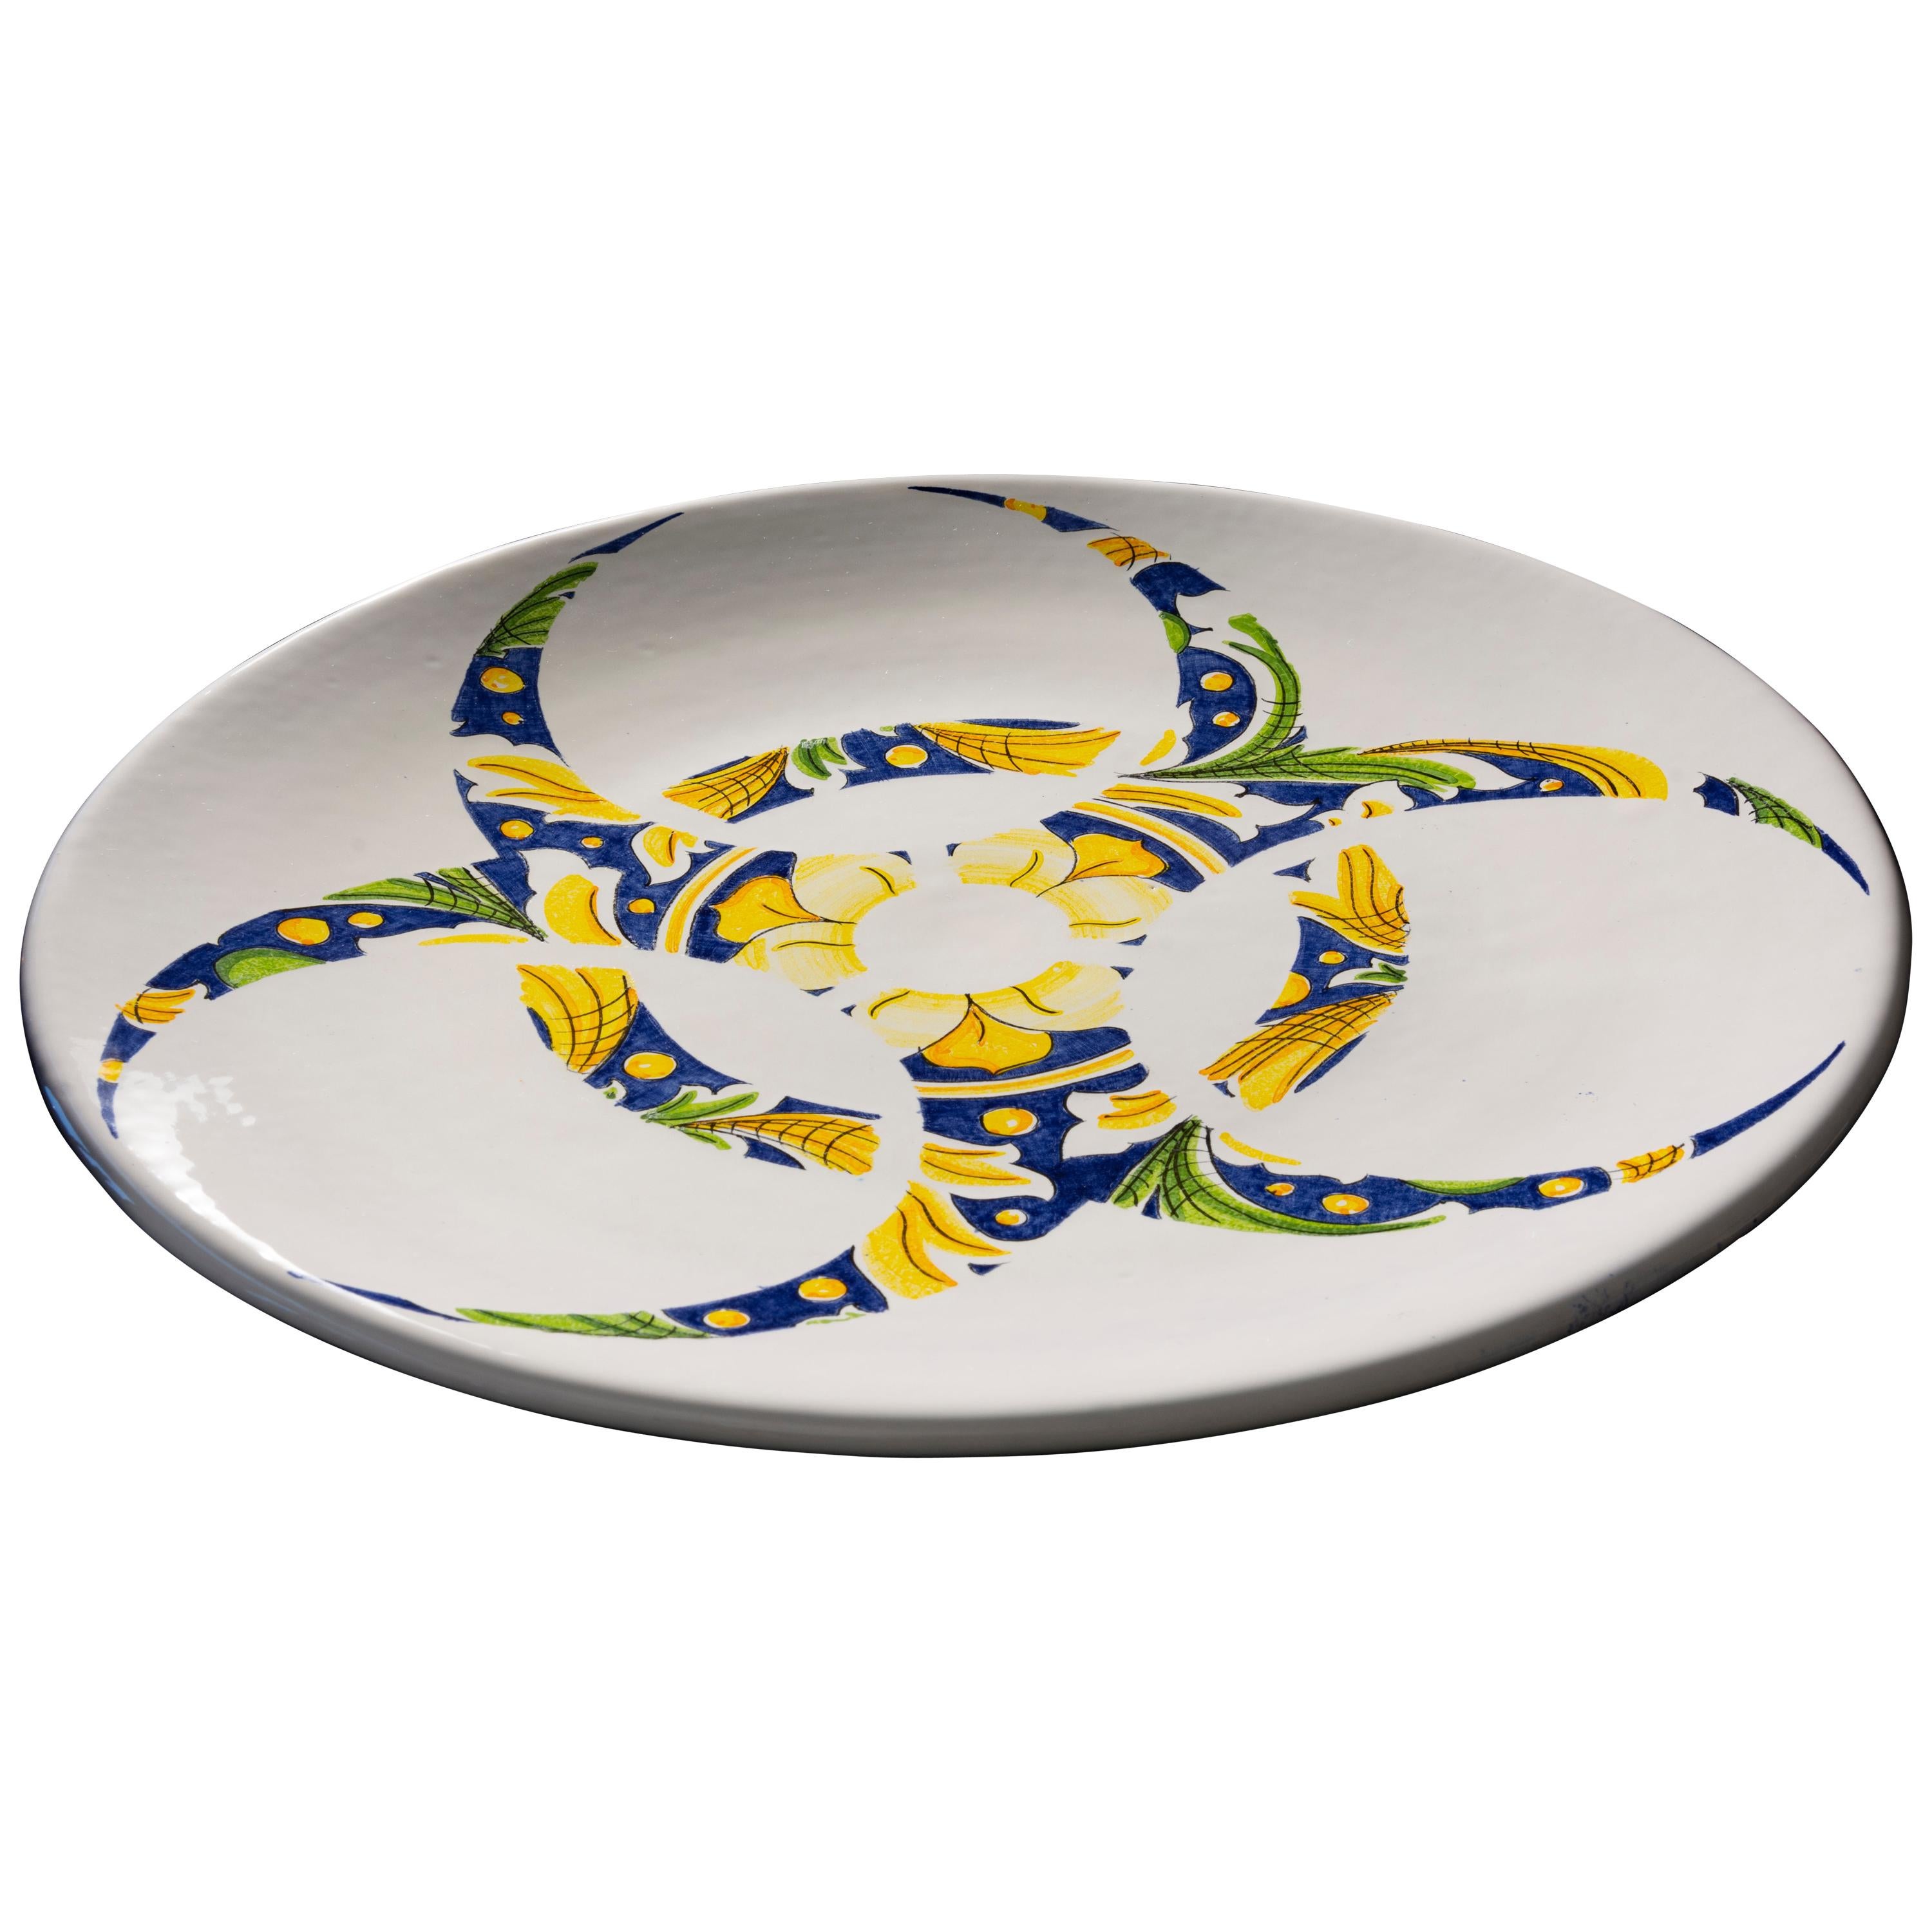 Ceramic Plate by Pantoù Ceramics Hand Painted Glazed Earthenware Contemporary